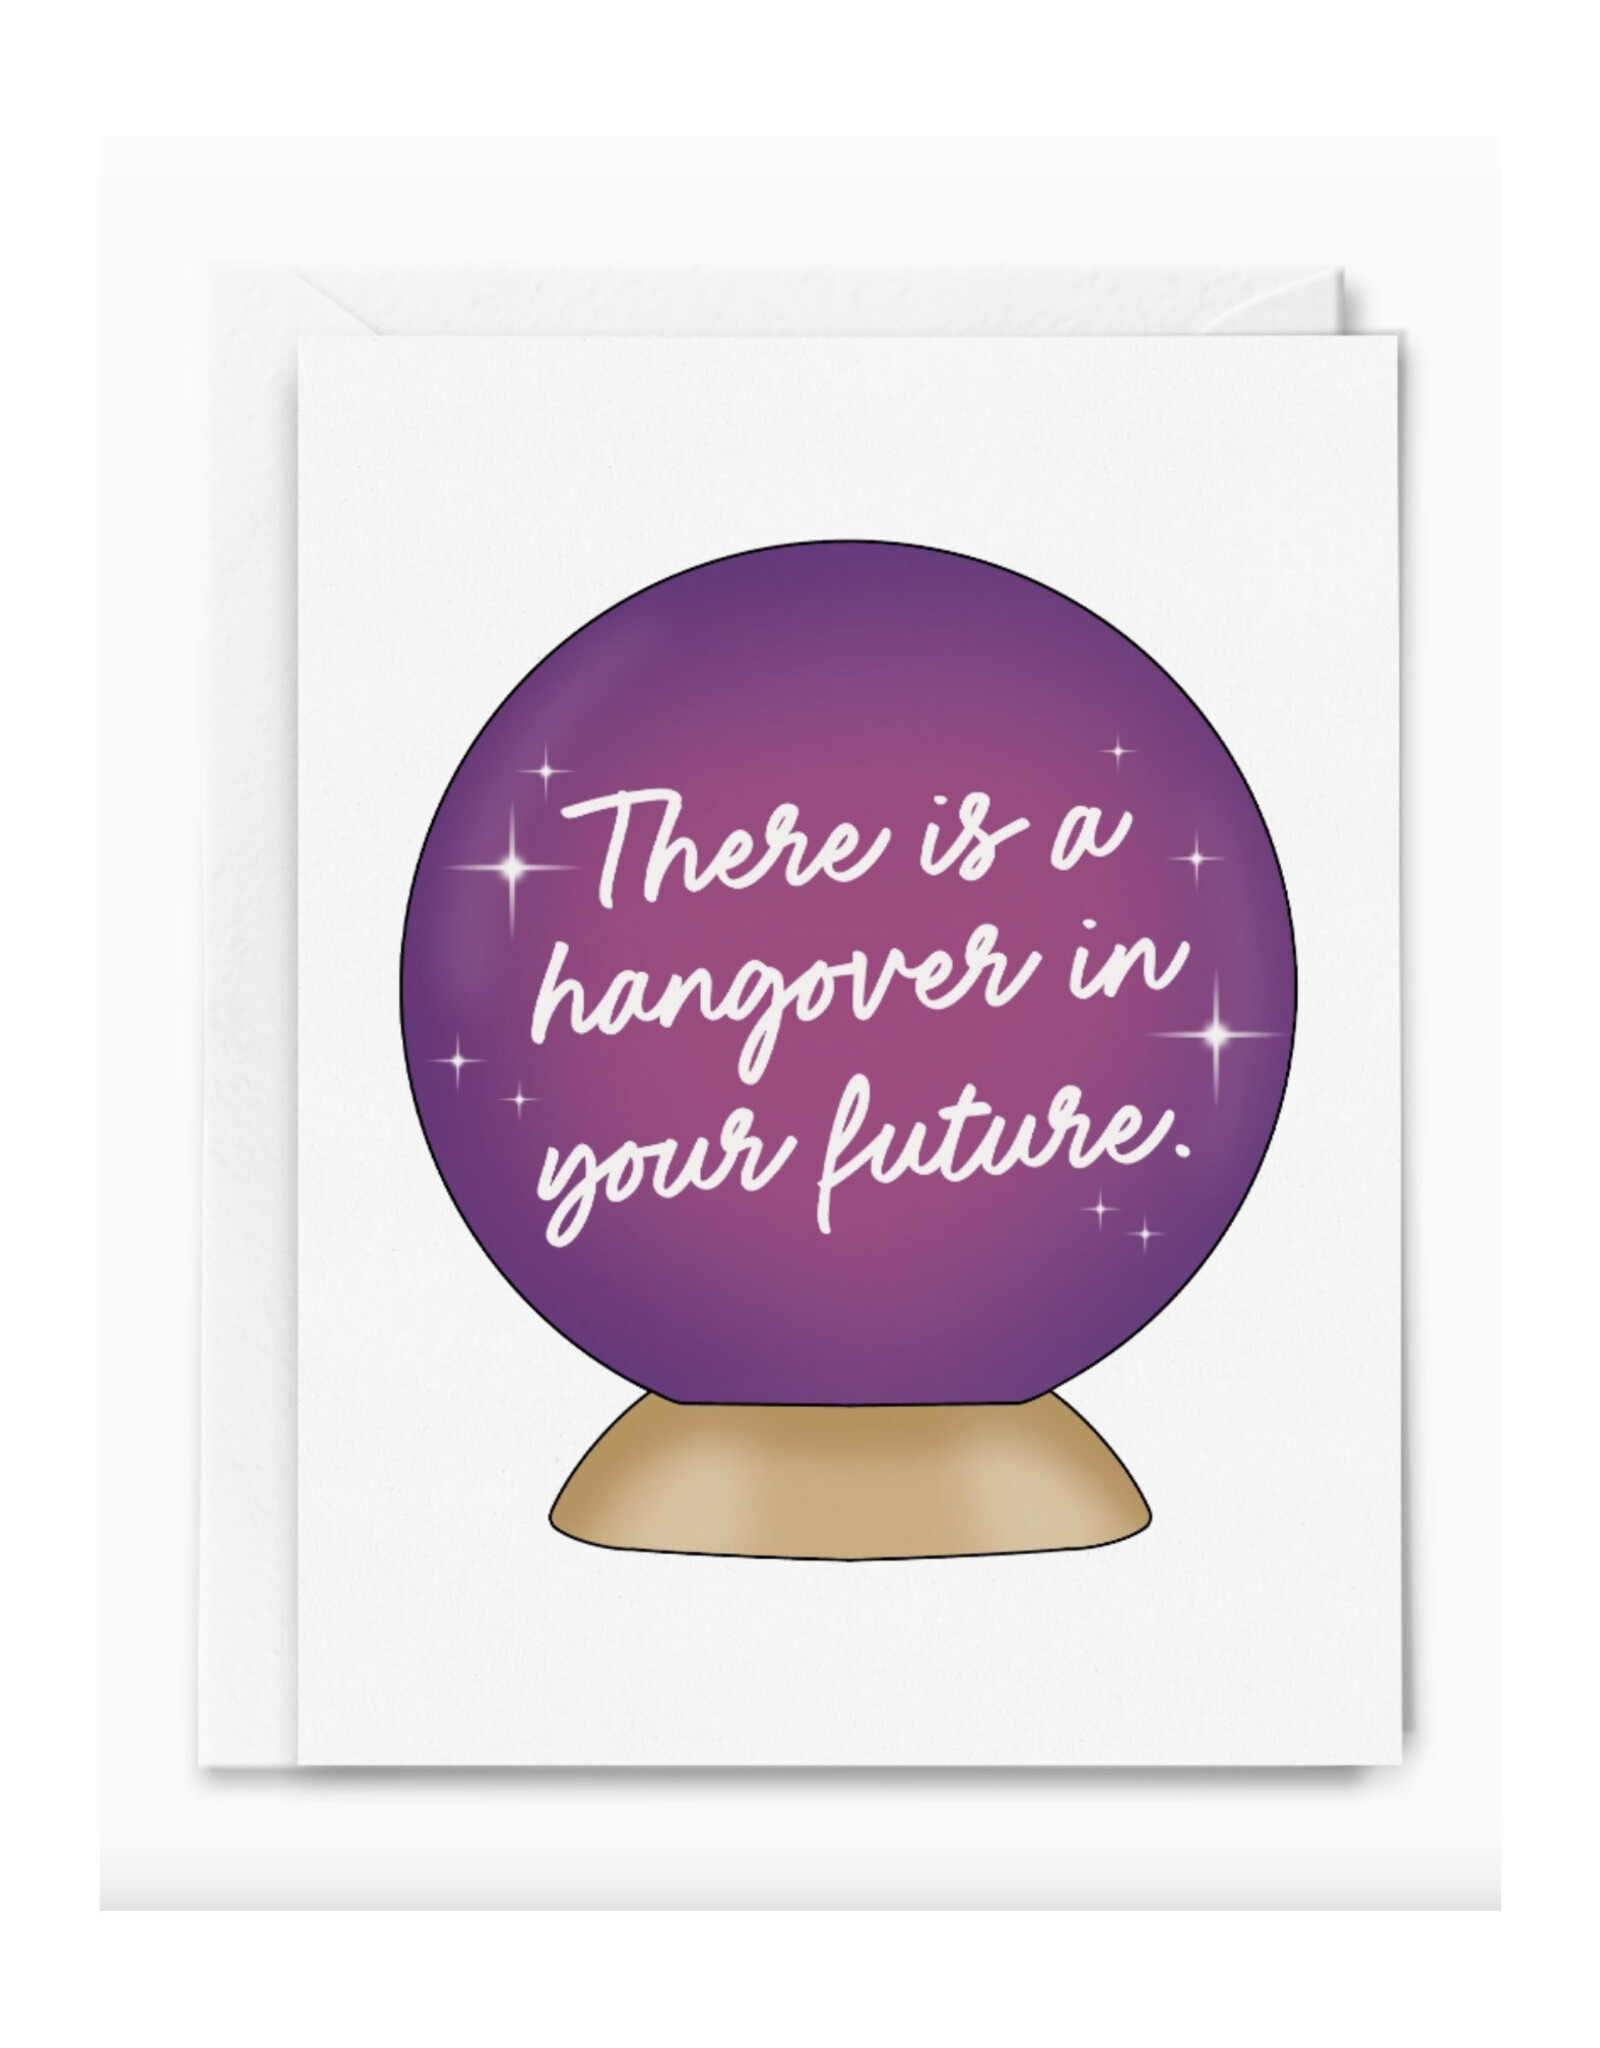 Crystal Ball Hangover In Your Future Greeting Card